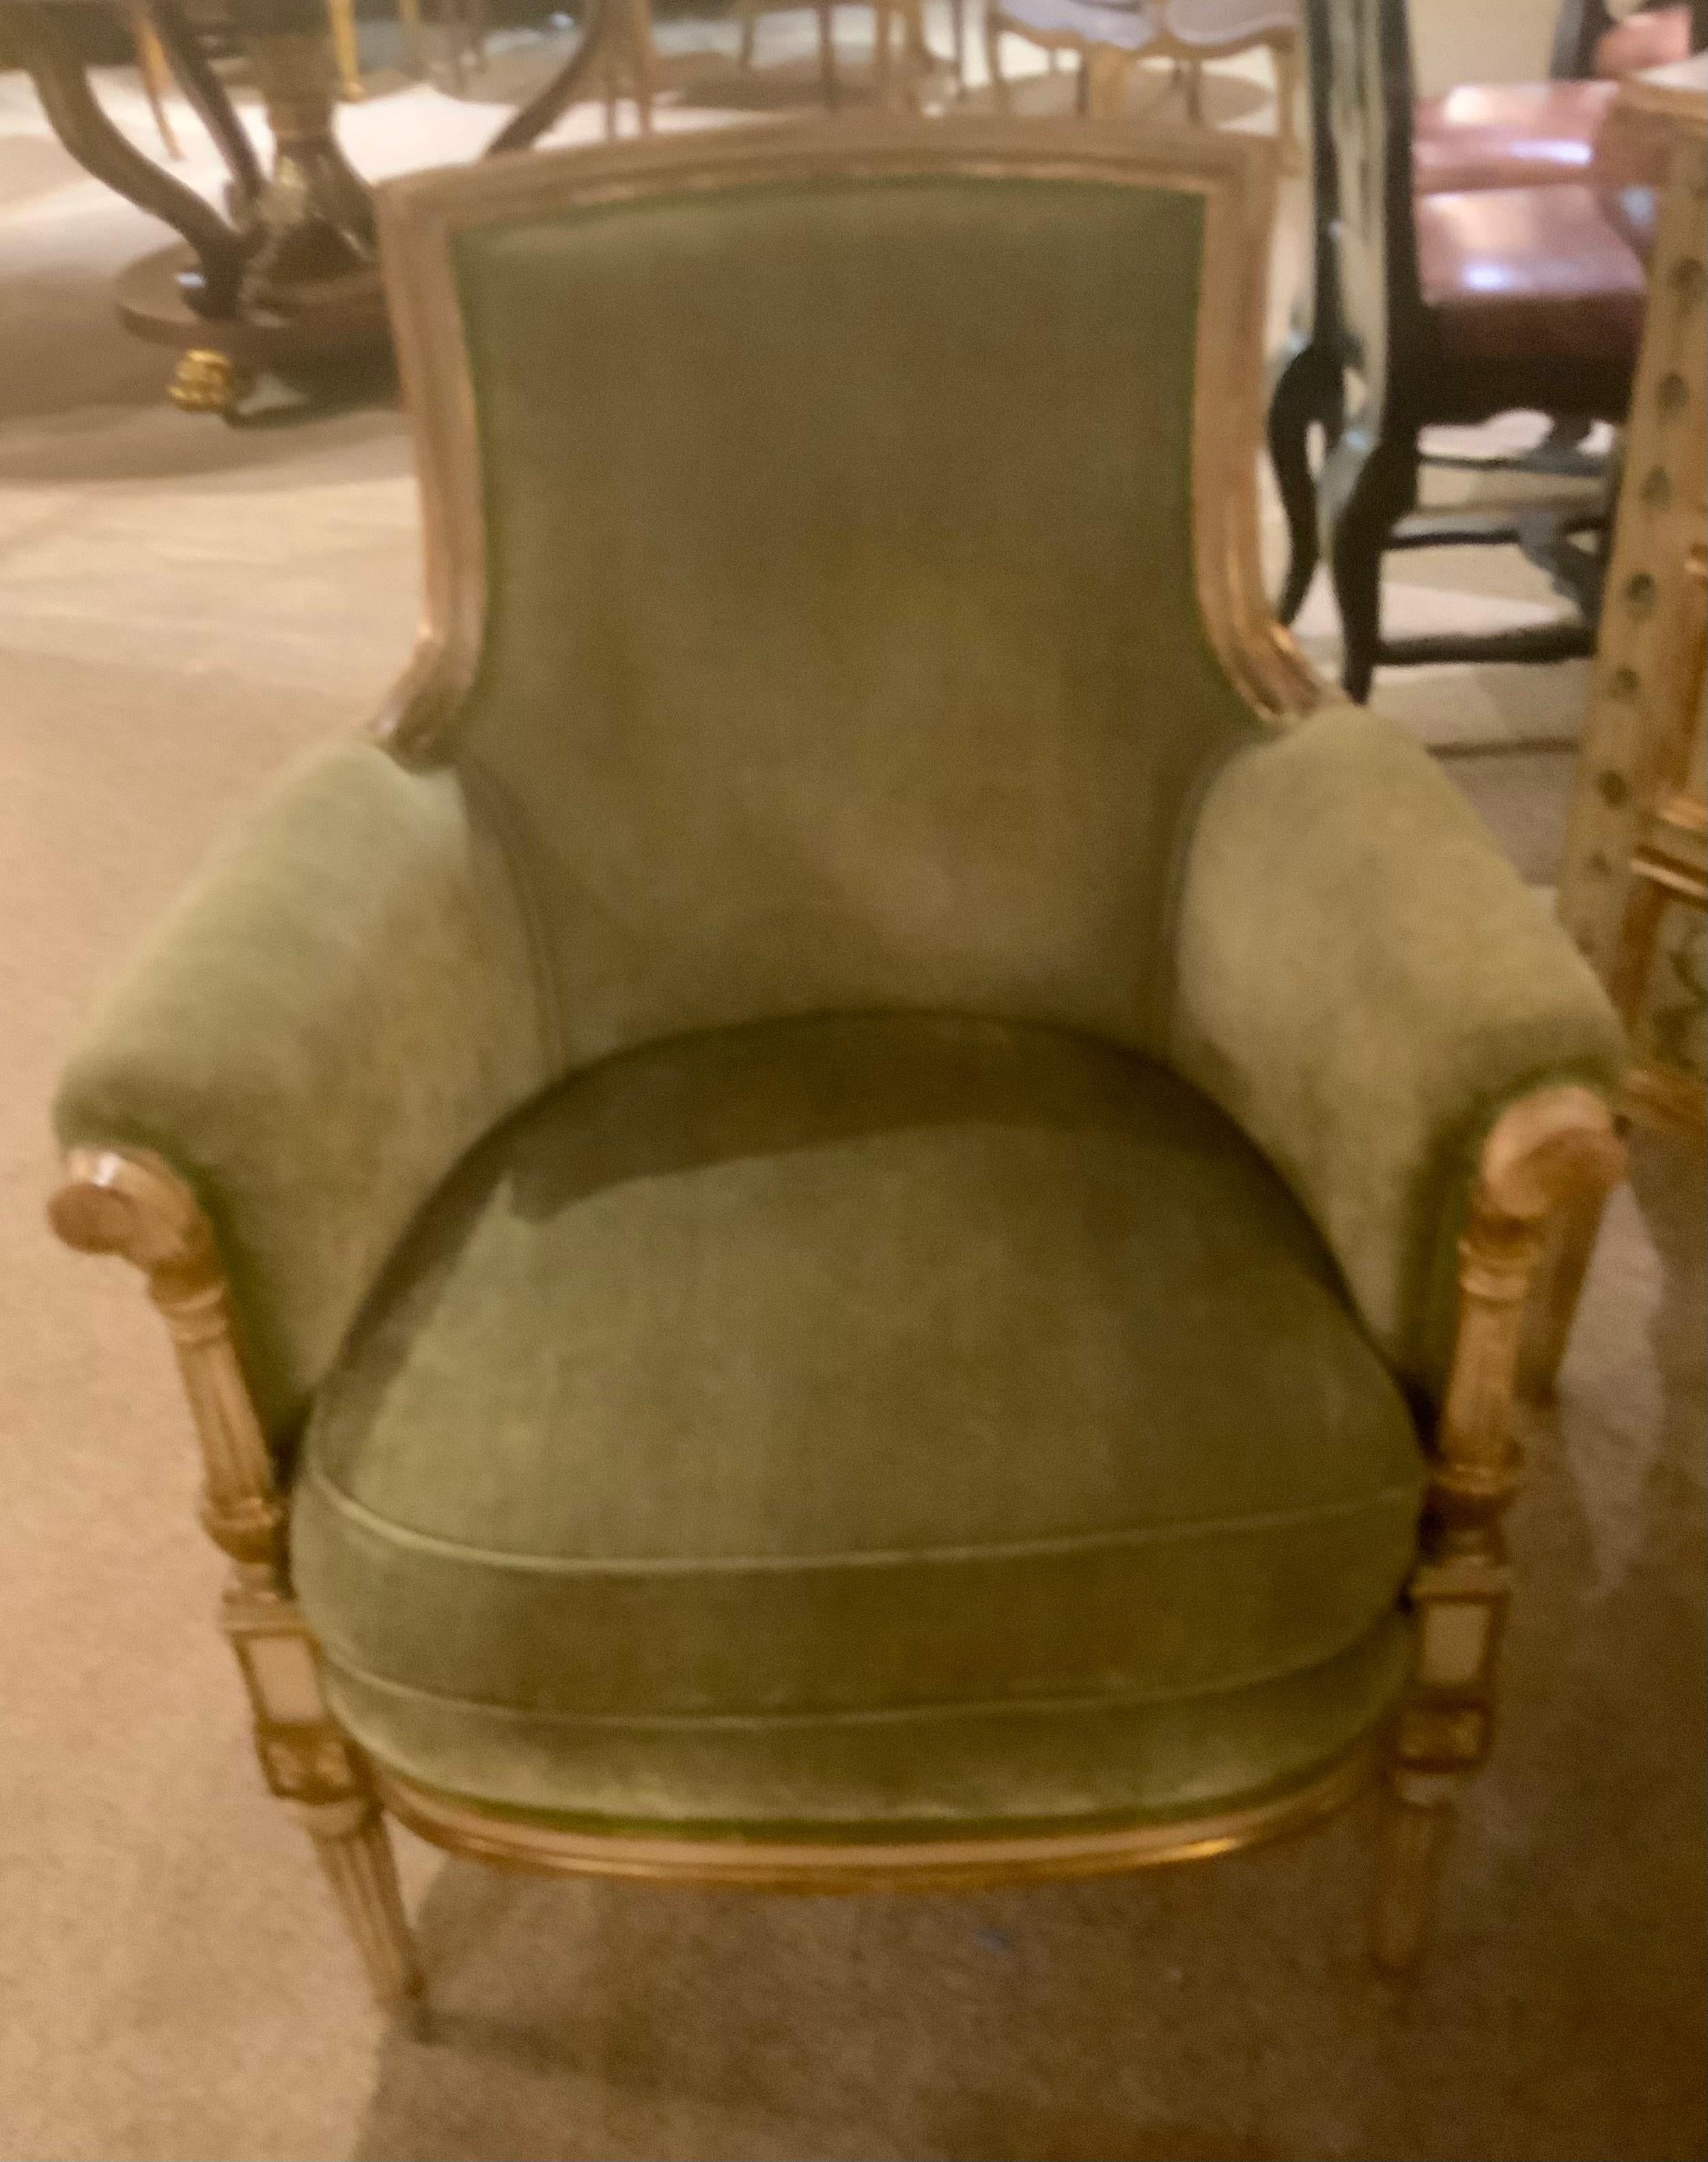 These chairs are a great example of true bergere chairs
From France. The finish is original in parcel paint
And parcel gilt finish. The patina is a great example of
The wear that is expected of this period. The fabric is in
Very good condition and